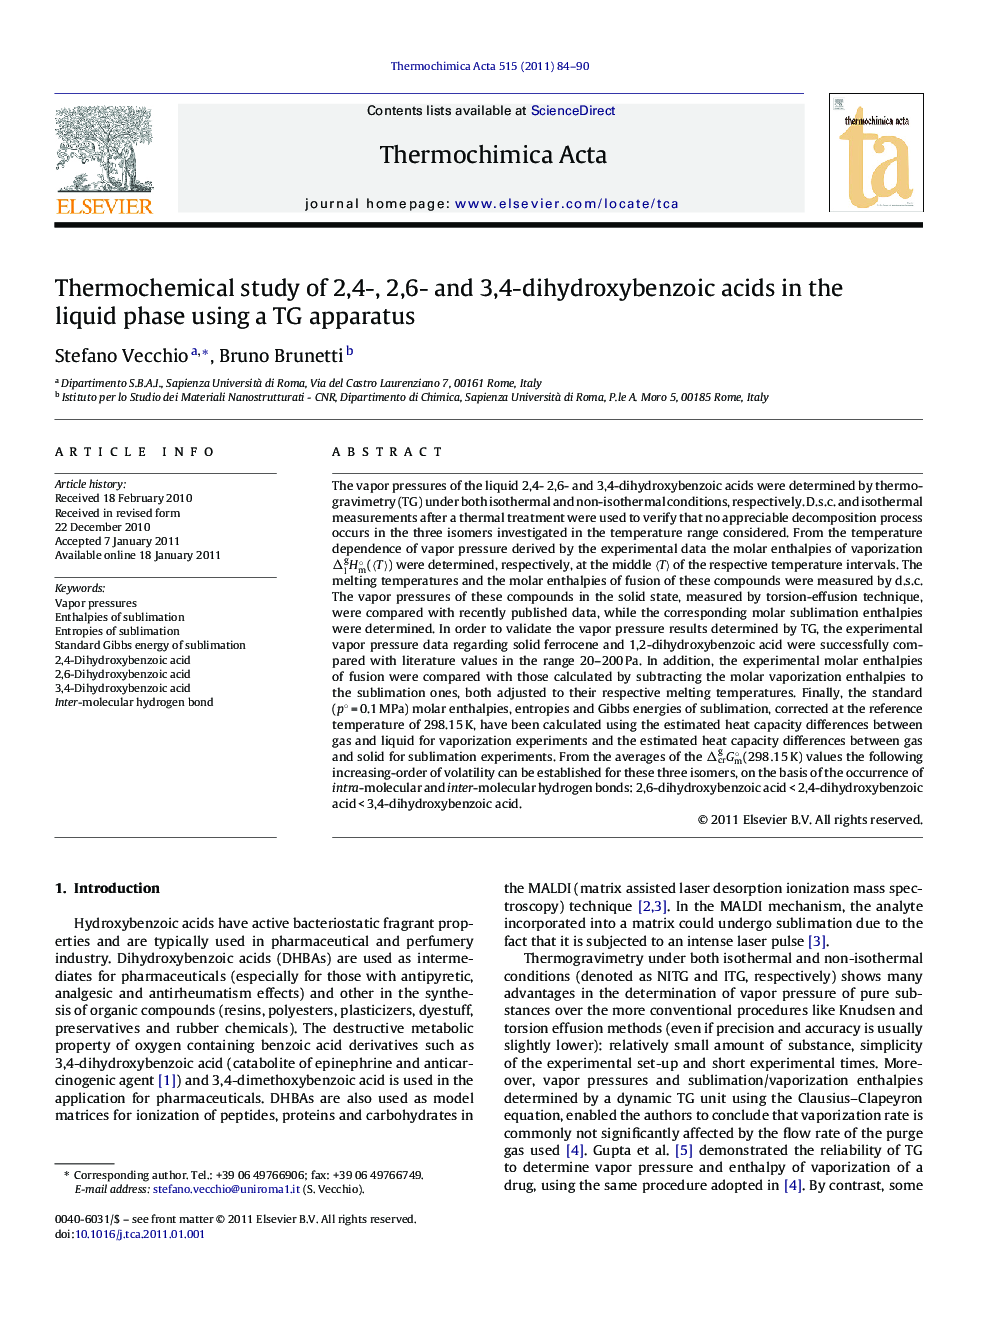 Thermochemical study of 2,4-, 2,6- and 3,4-dihydroxybenzoic acids in the liquid phase using a TG apparatus